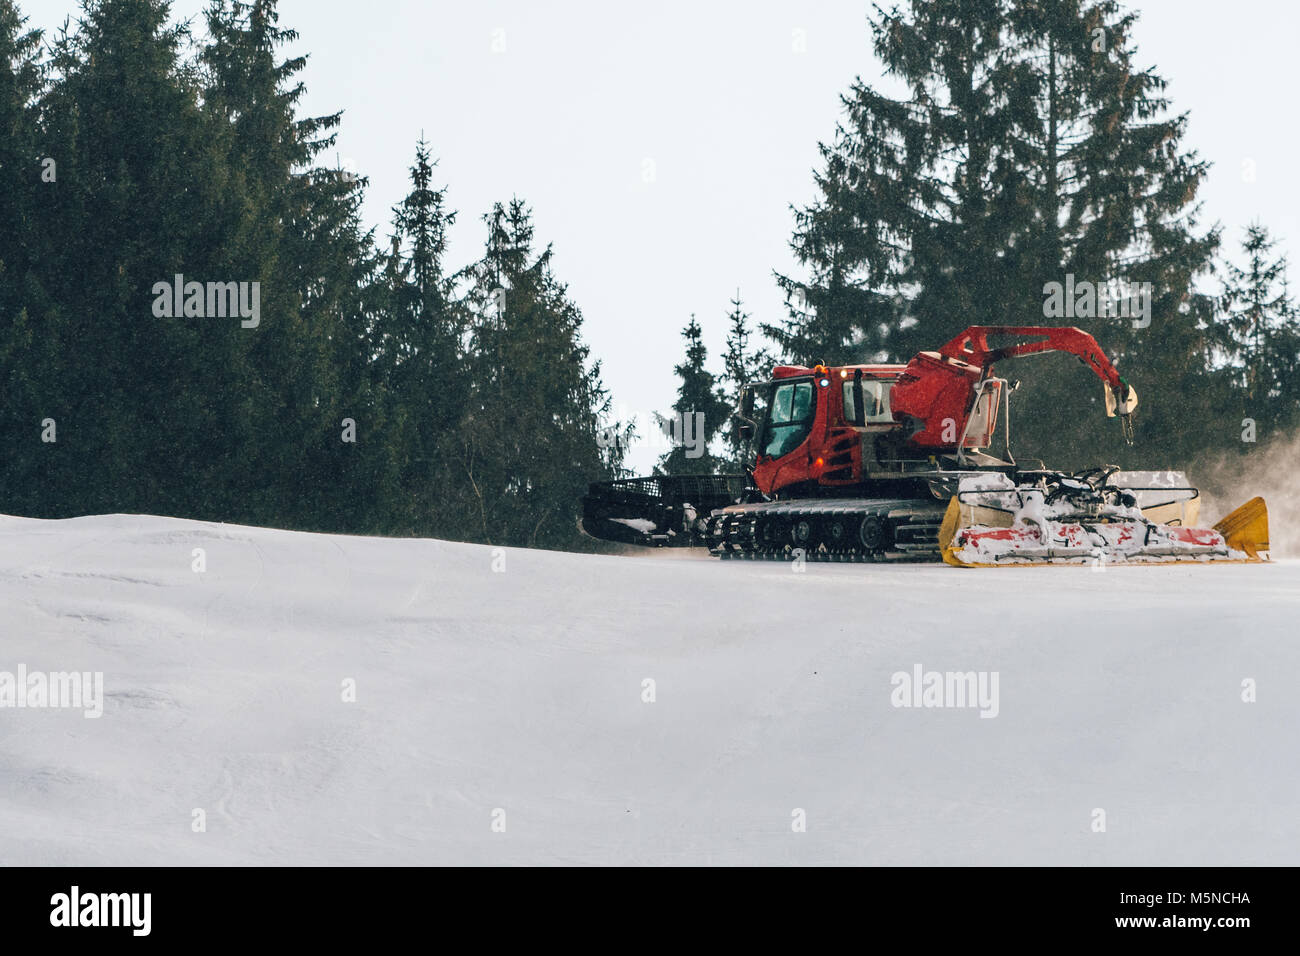 Red snowcat on snow in the winter in mountains. Ratrack improving or maintaining a ski slope. Snowing. Stock Photo